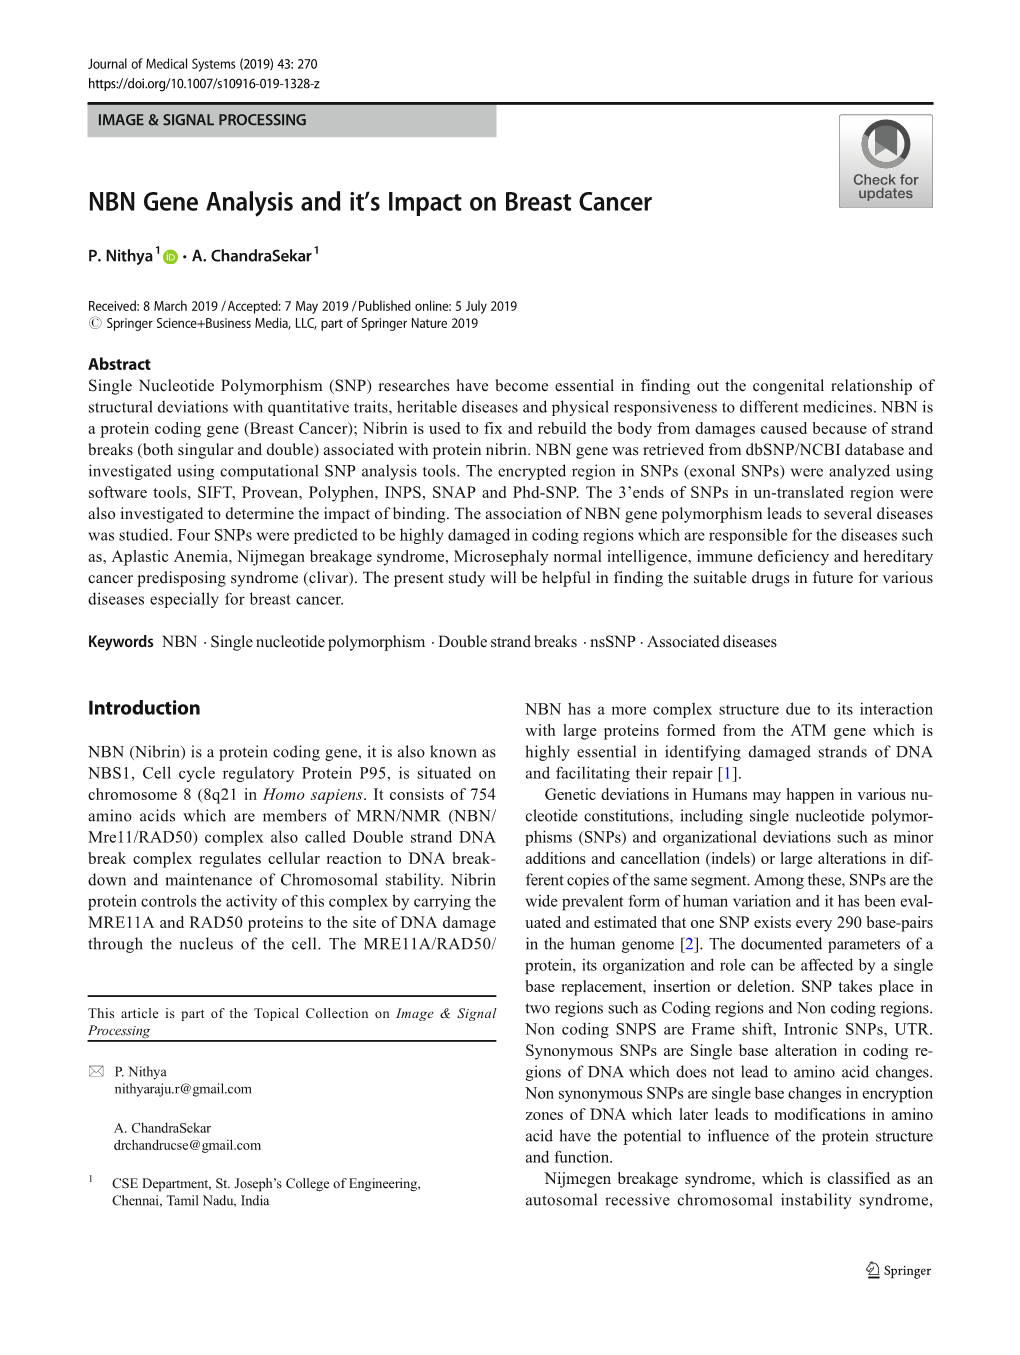 NBN Gene Analysis and It's Impact on Breast Cancer